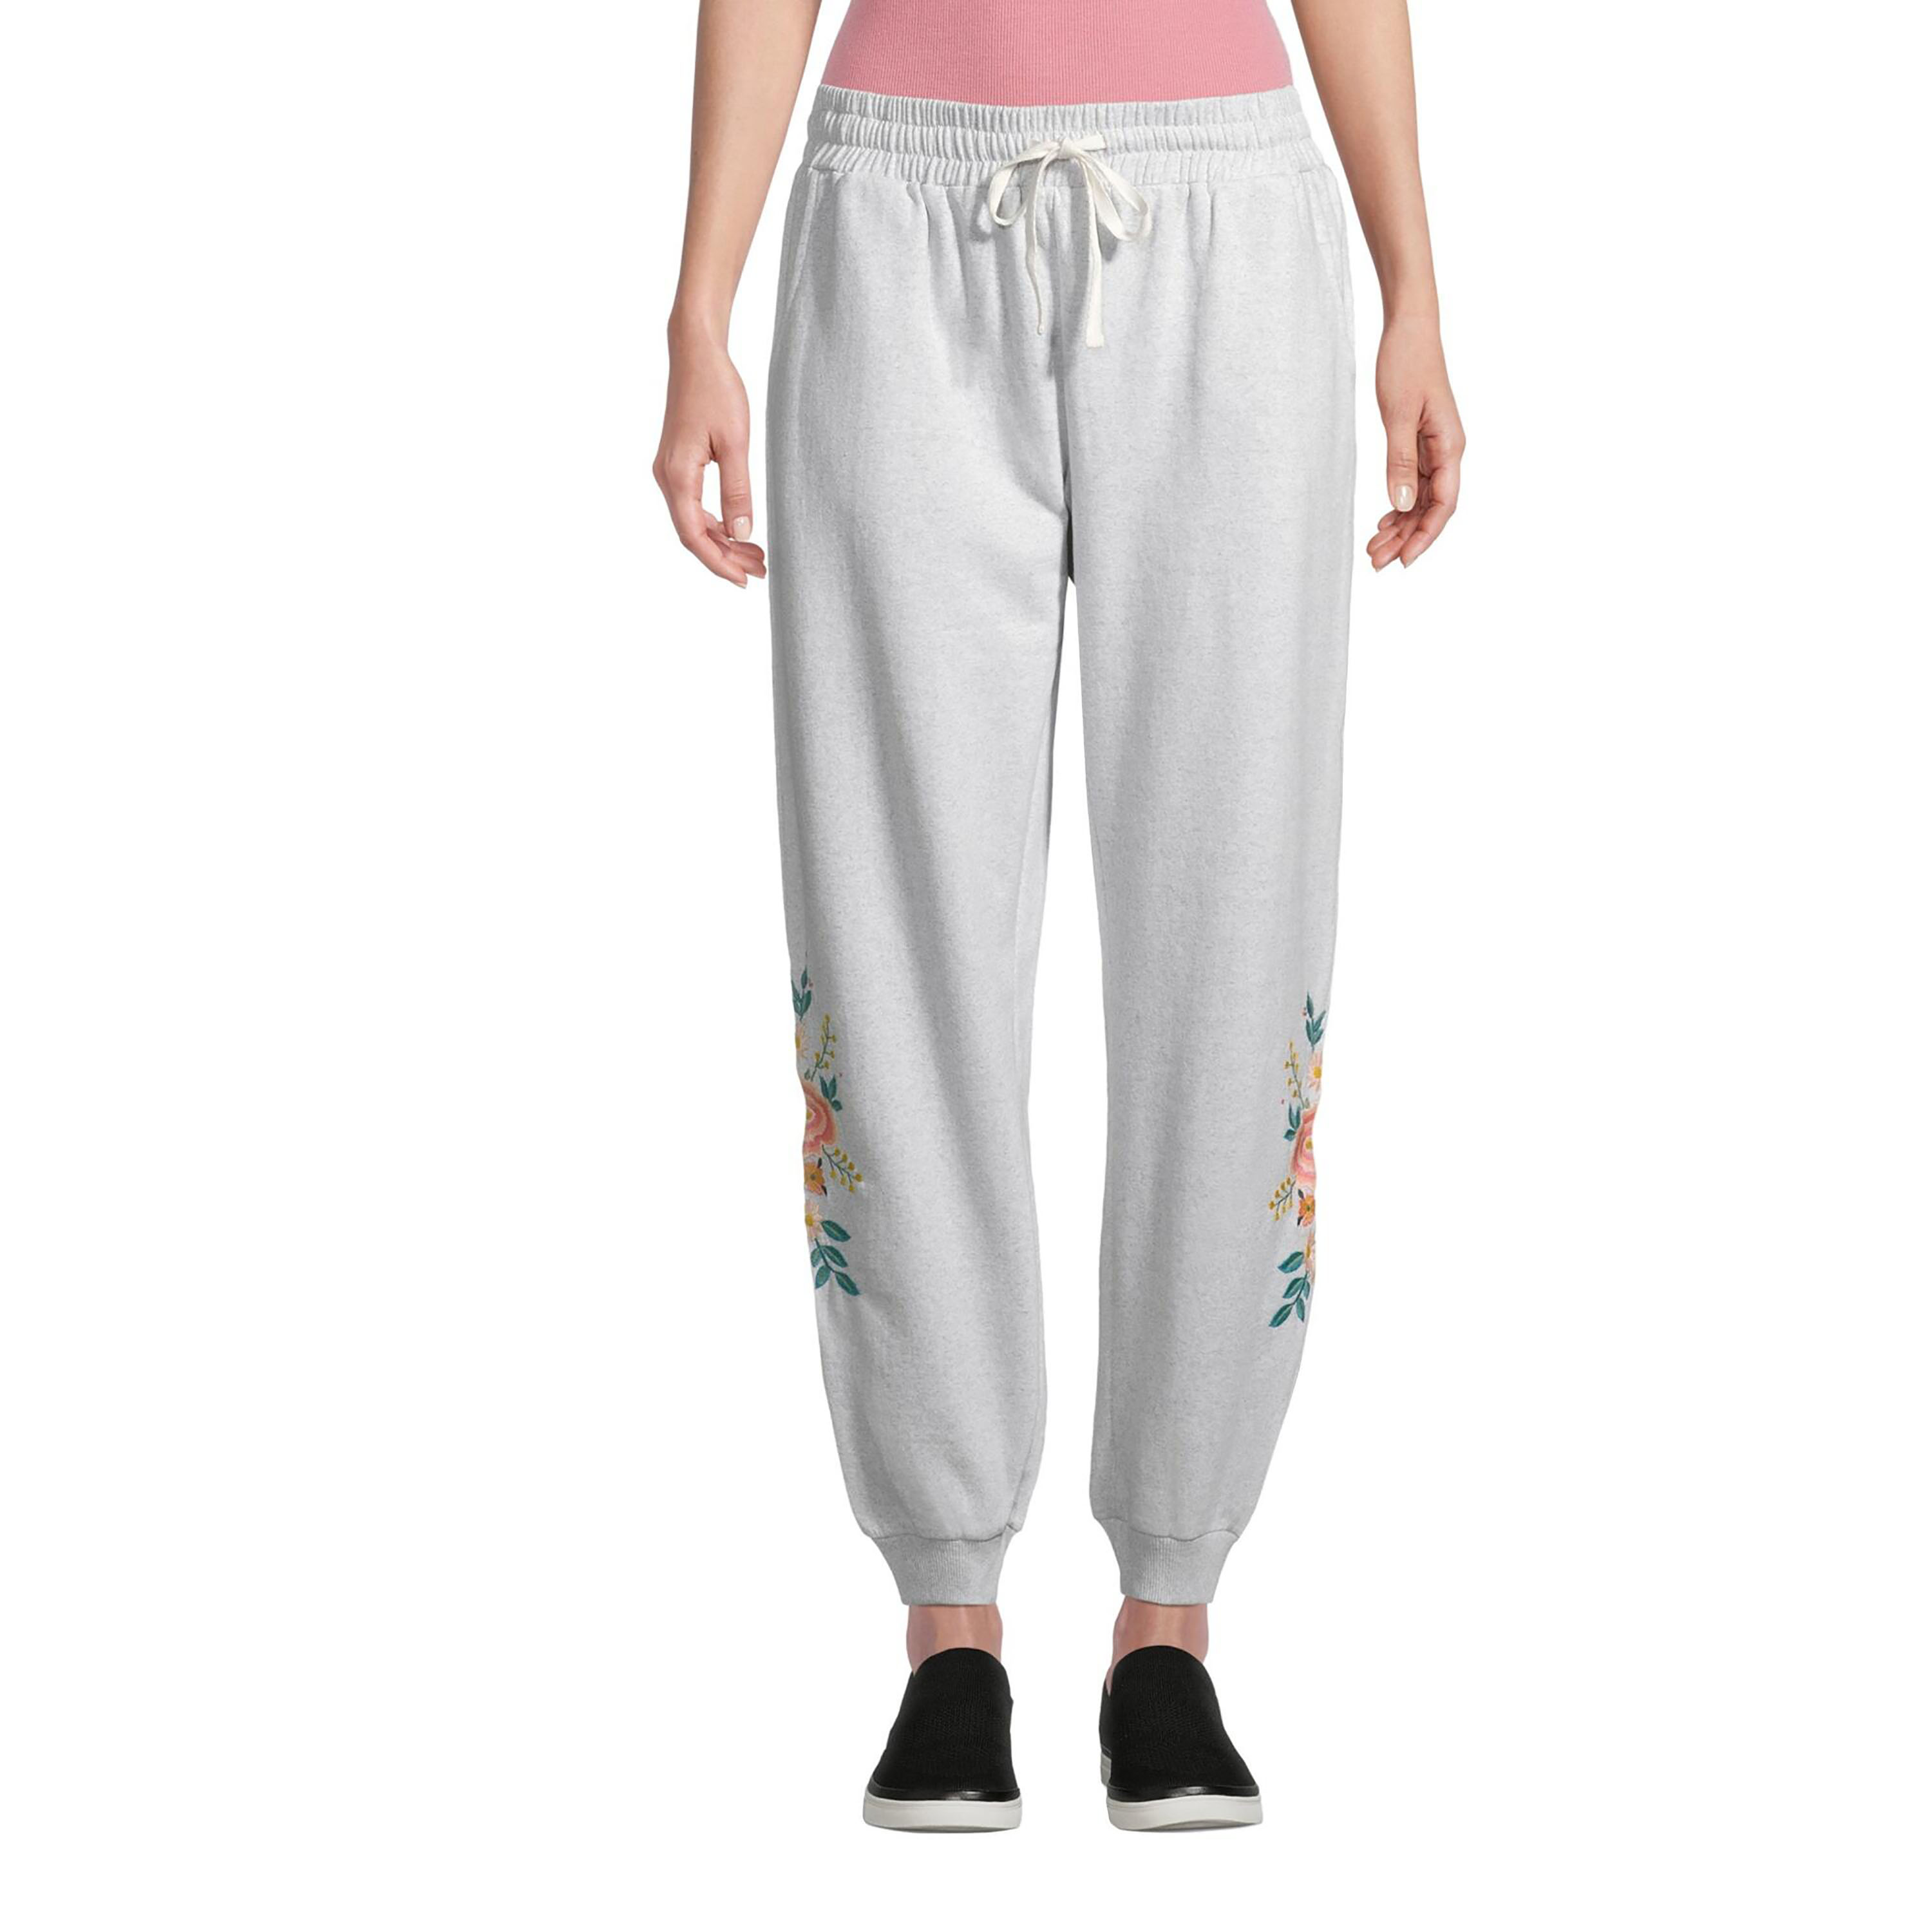 Gray Fleece Floral Embroidered Lounge Pants - World Market